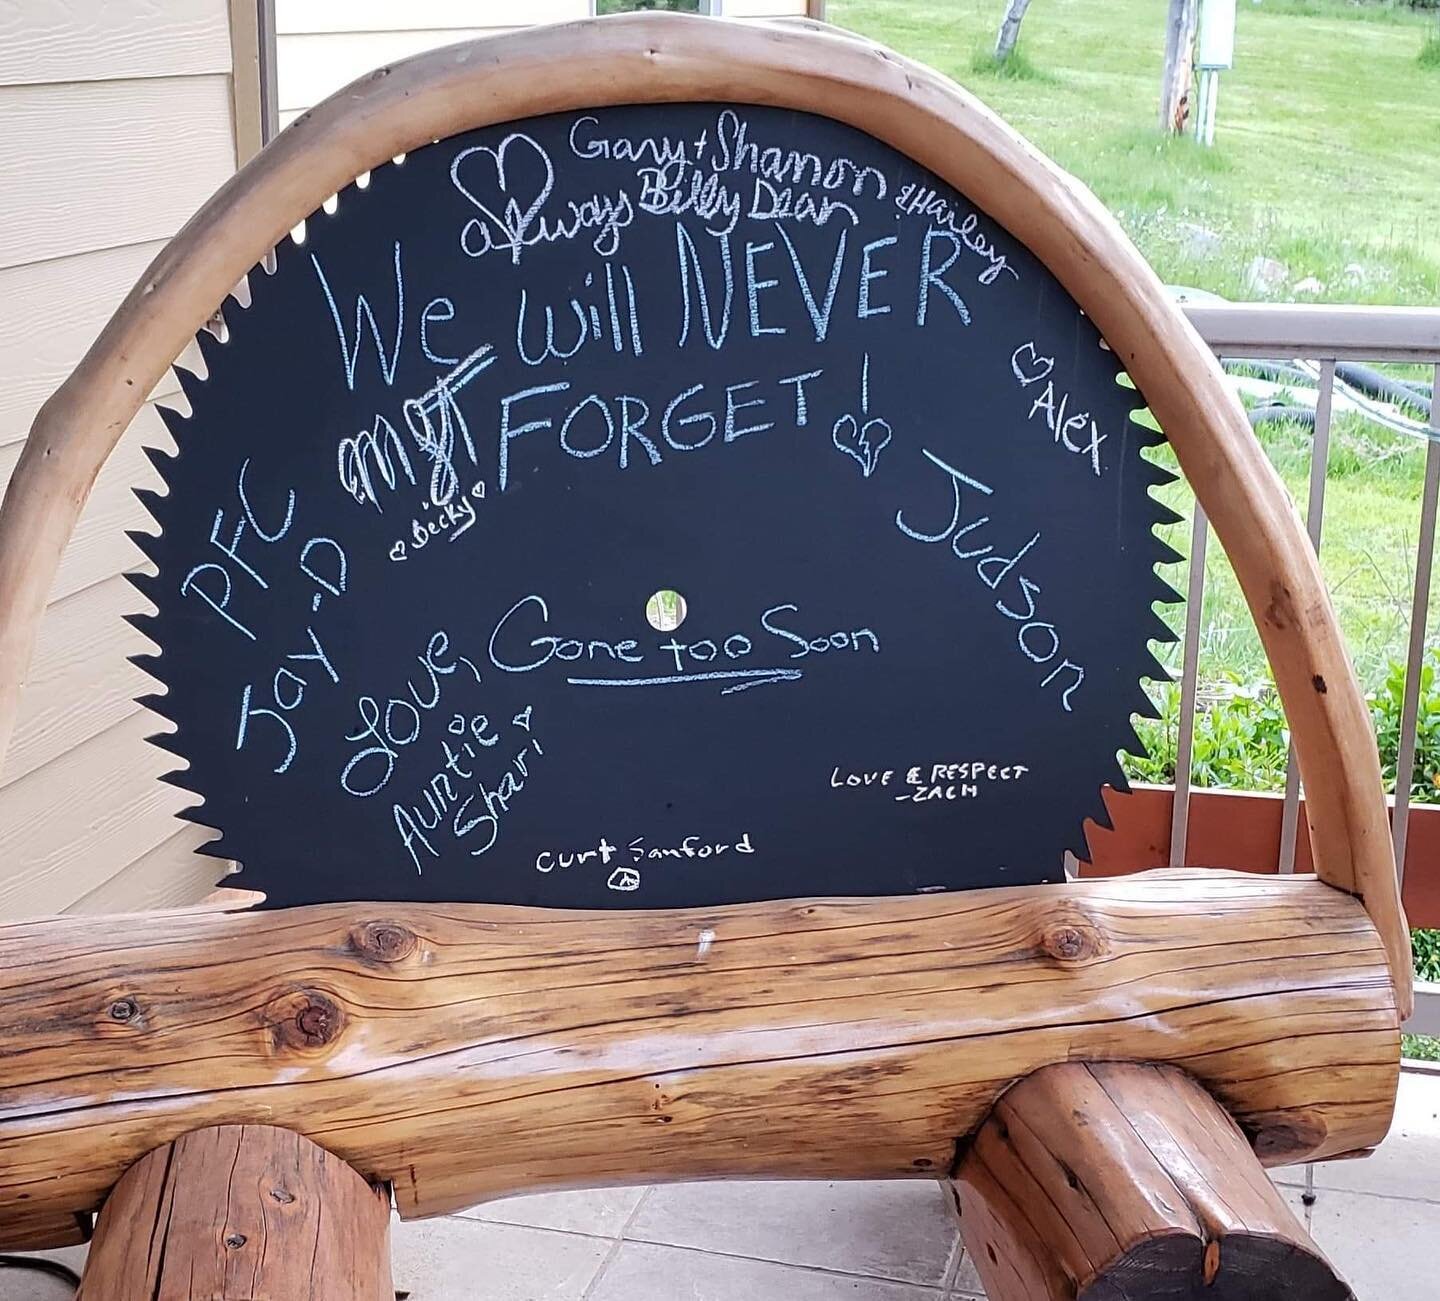 From my beautiful friend Shari: ❤️❤️❤️
Hello darlin 😘 
We had family over today for Memorial Day. We have this chalkboard on our porch. Just wanted to share this picture with you. JayD and Judson were on our minds and hearts as were their mama's ❤